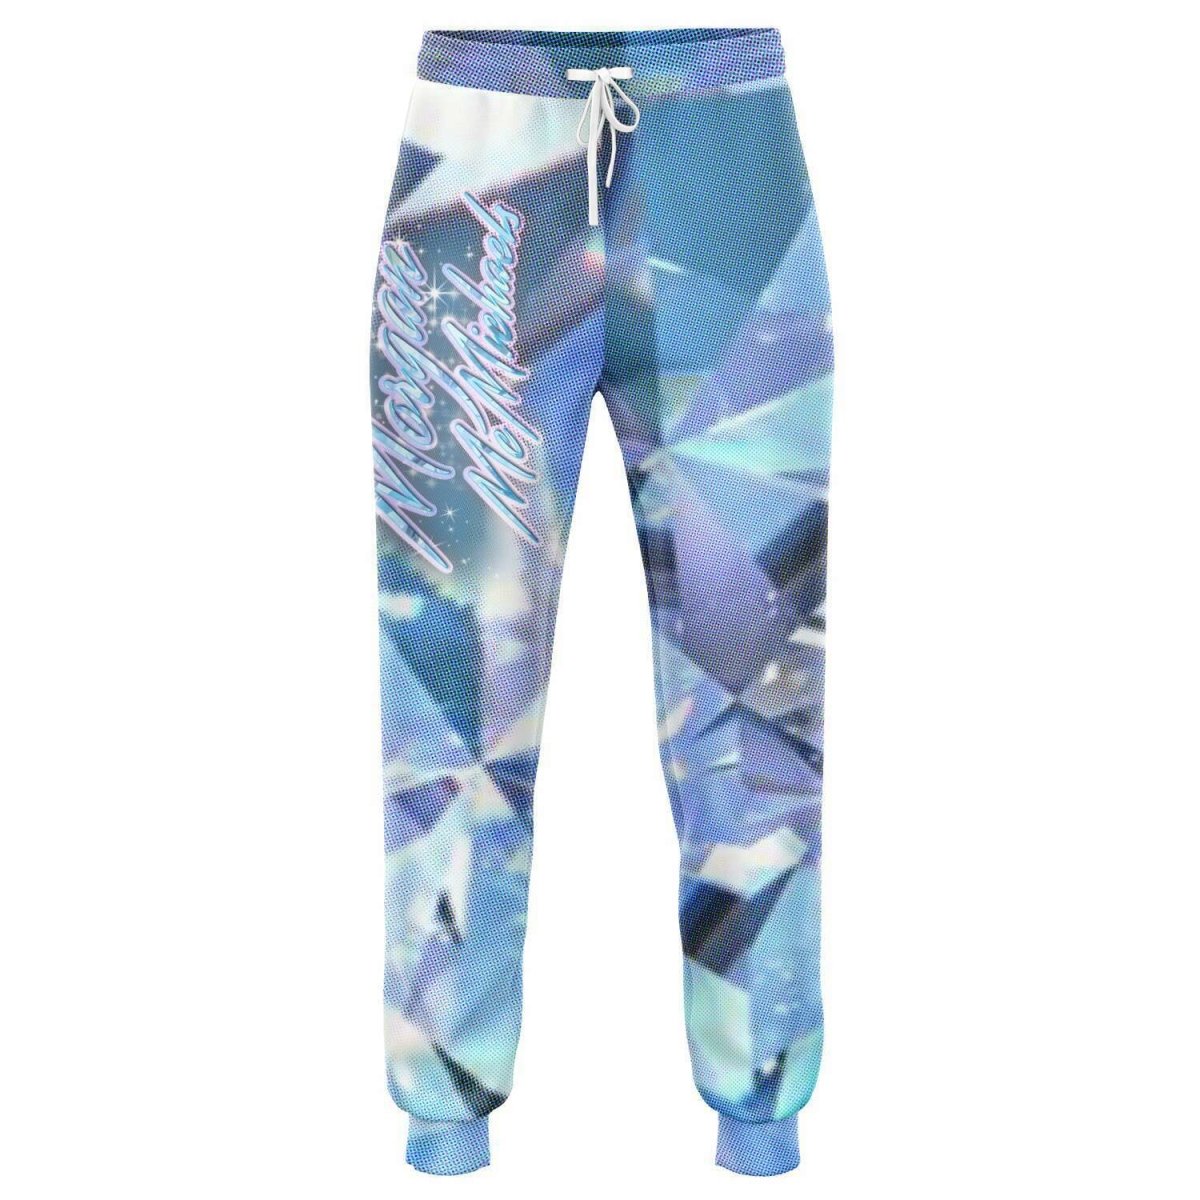 MORGAN MCMICHAELS "DIAMONDS FOREVER" ALL OVER PRINT JOGGER - dragqueenmerch